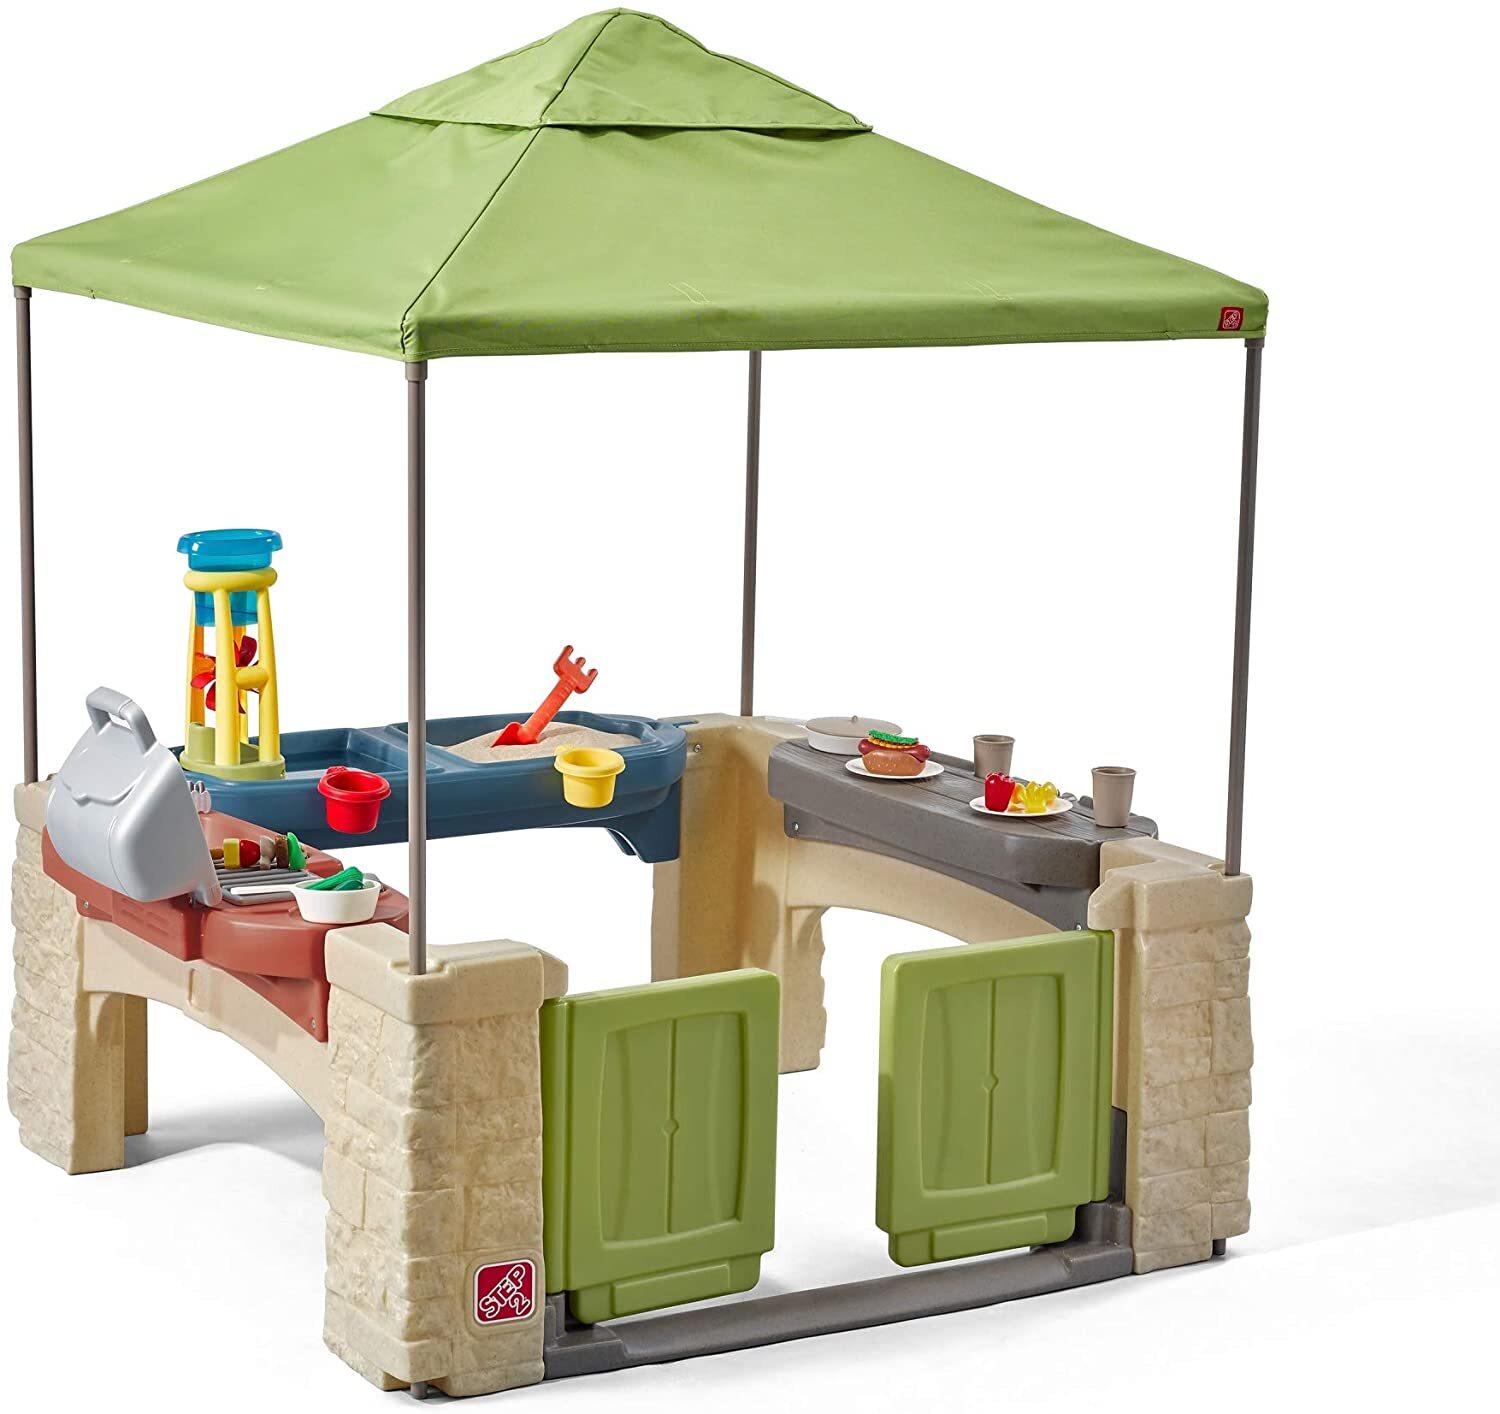 Large Open Canopy Playhouse for Kids